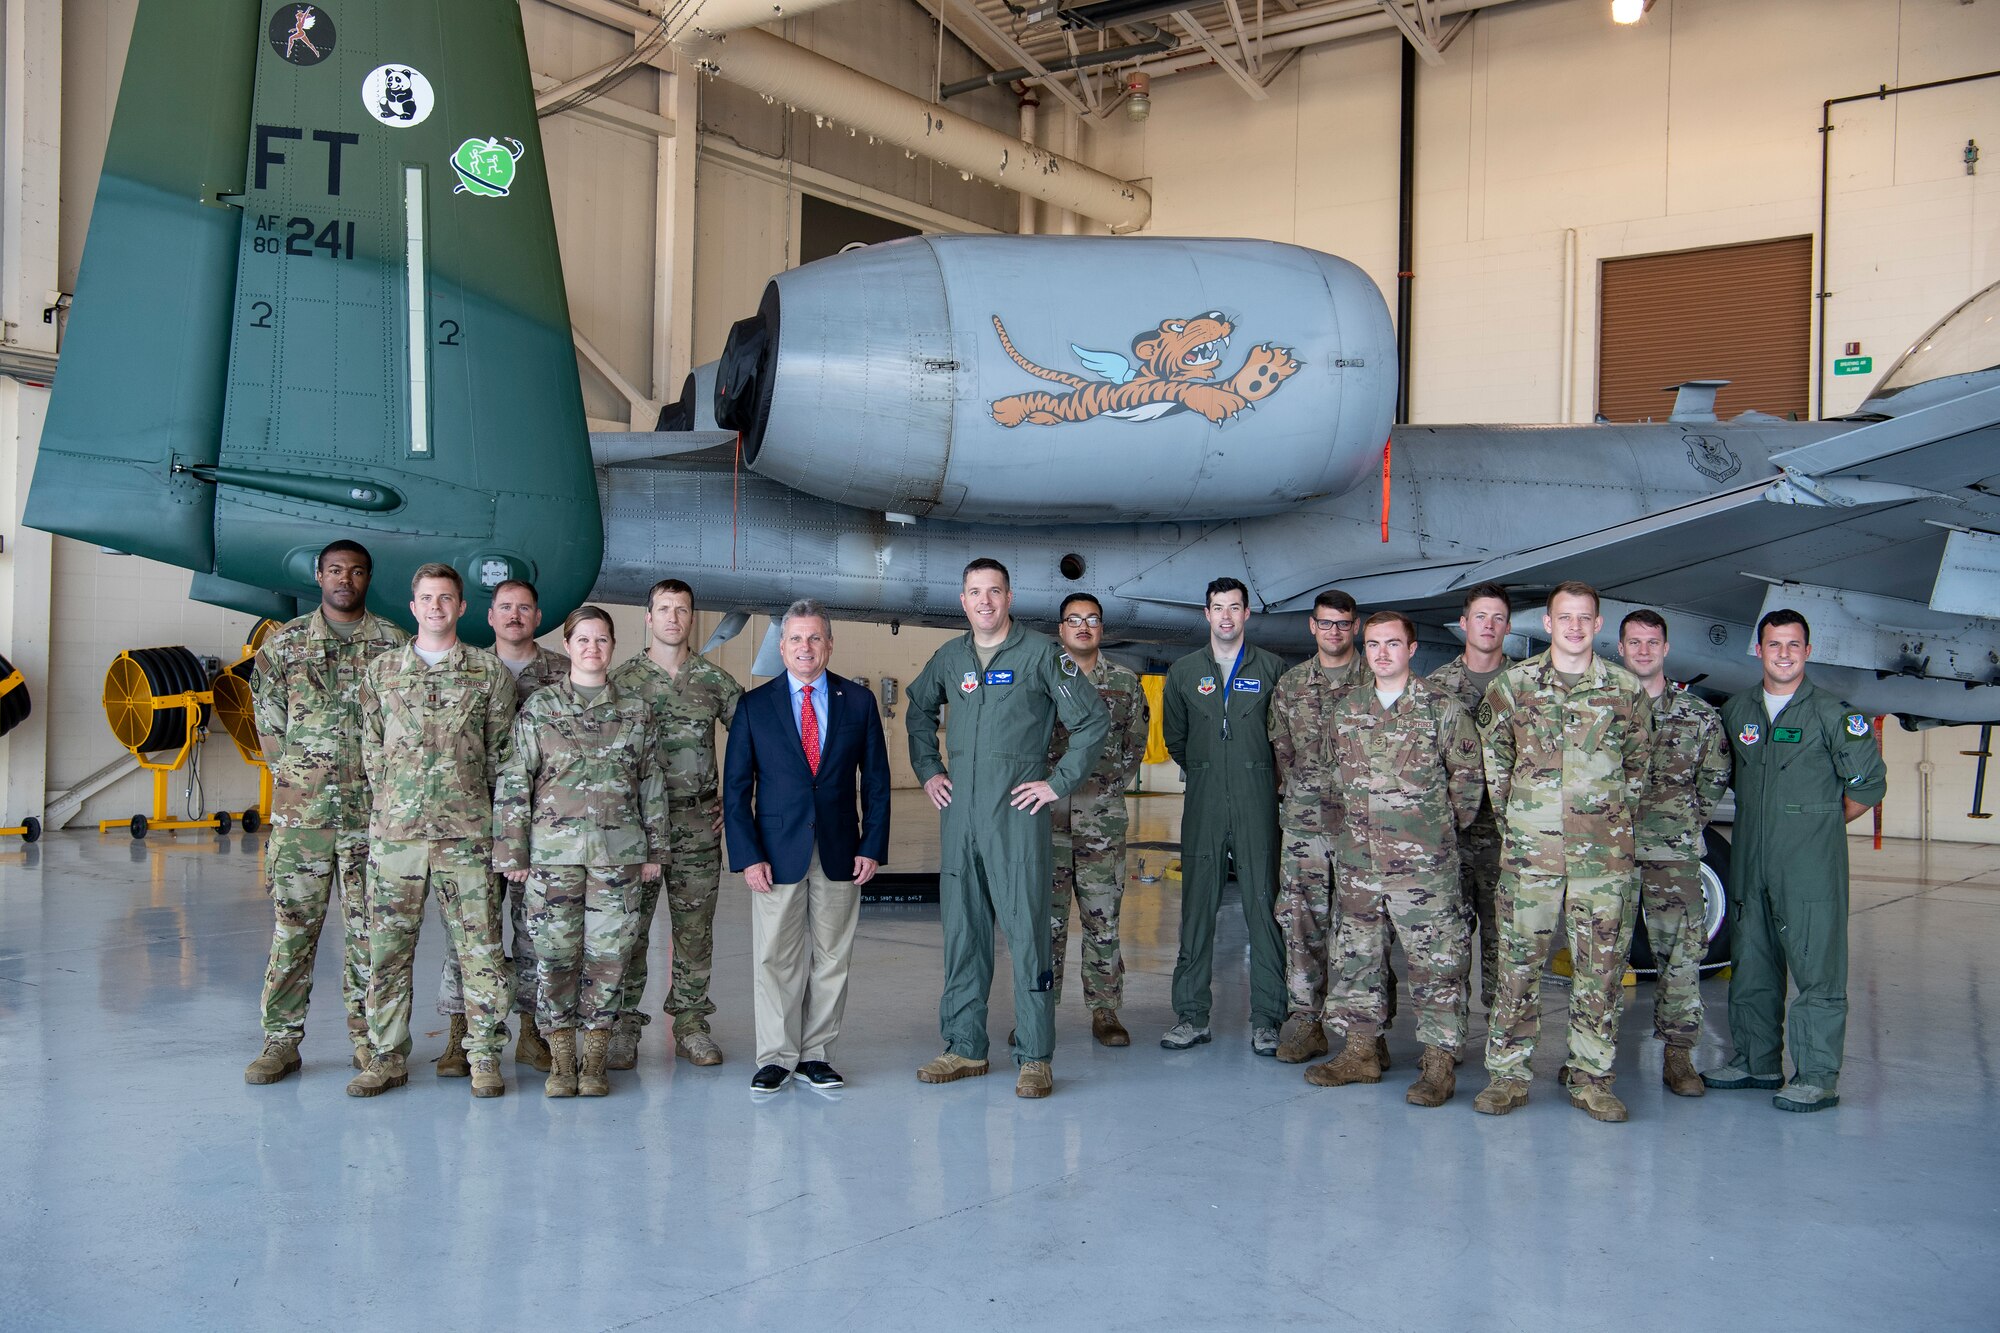 U.S. Representative Buddy Carter, Georgia District 1, poses for a photo with Airmen in front of the 23d Wing A-10C Thunderbolt II flagship at Moody Air Force Base, Ga., Oct. 3, 2019. During his visit, Congressman Carter met Flying Tiger Airmen to learn about their contributions to the 23d Wing mission. (U.S. Air Force photo by Andrea Jenkins)